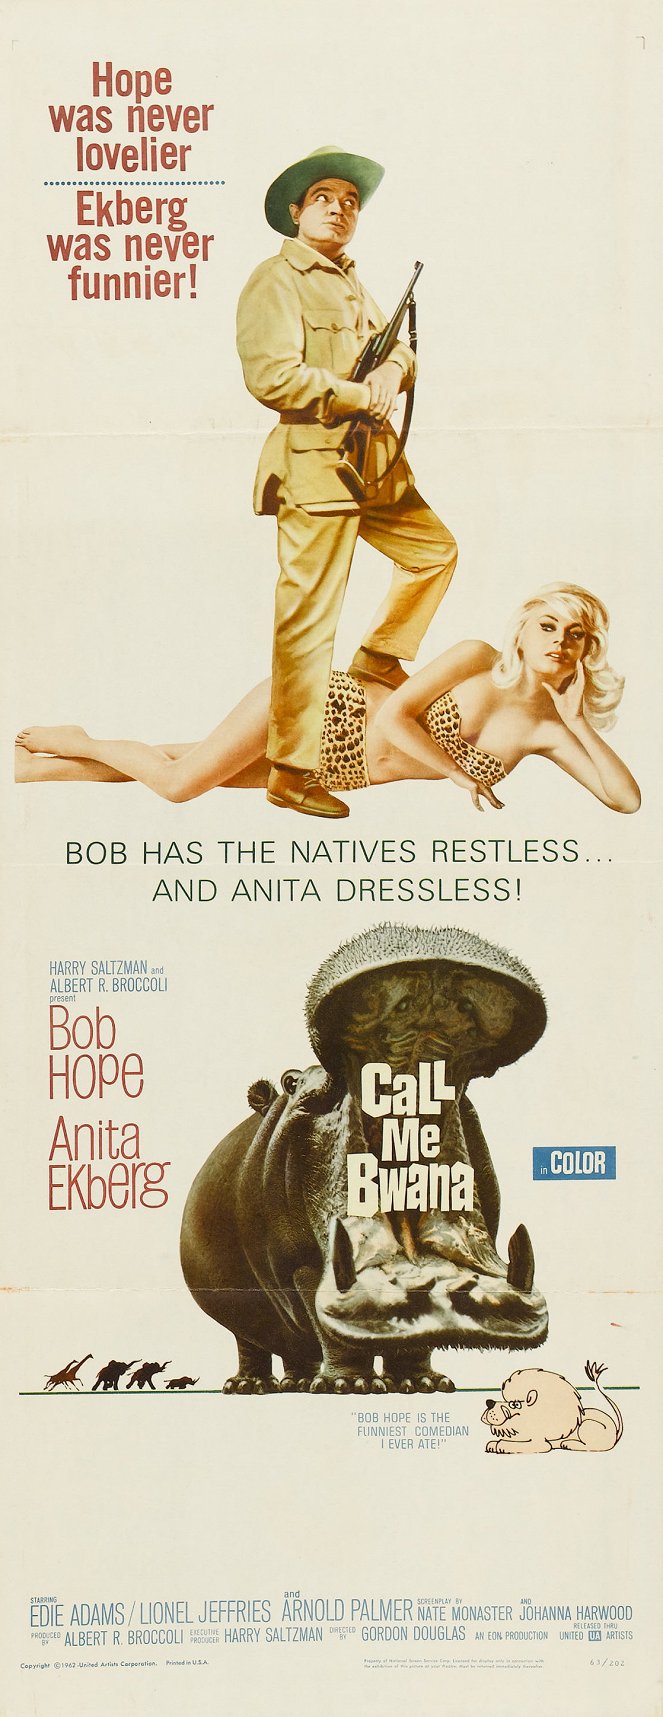 Call Me Bwana - Affiches